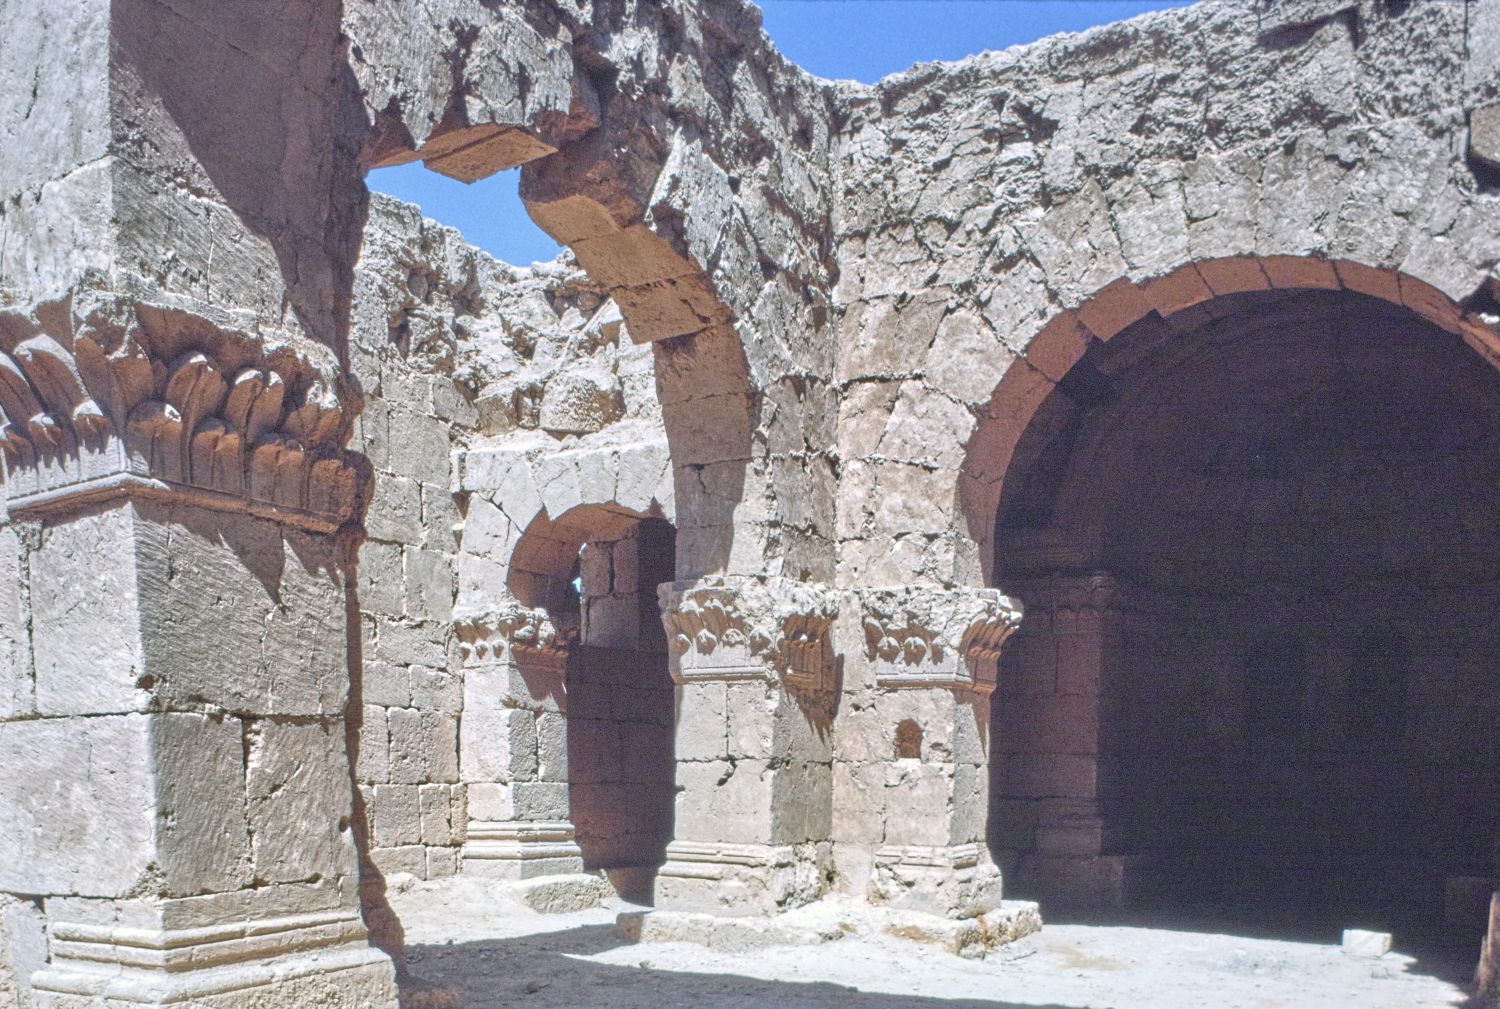 Interior view looking northeast toward apse from central square bay.